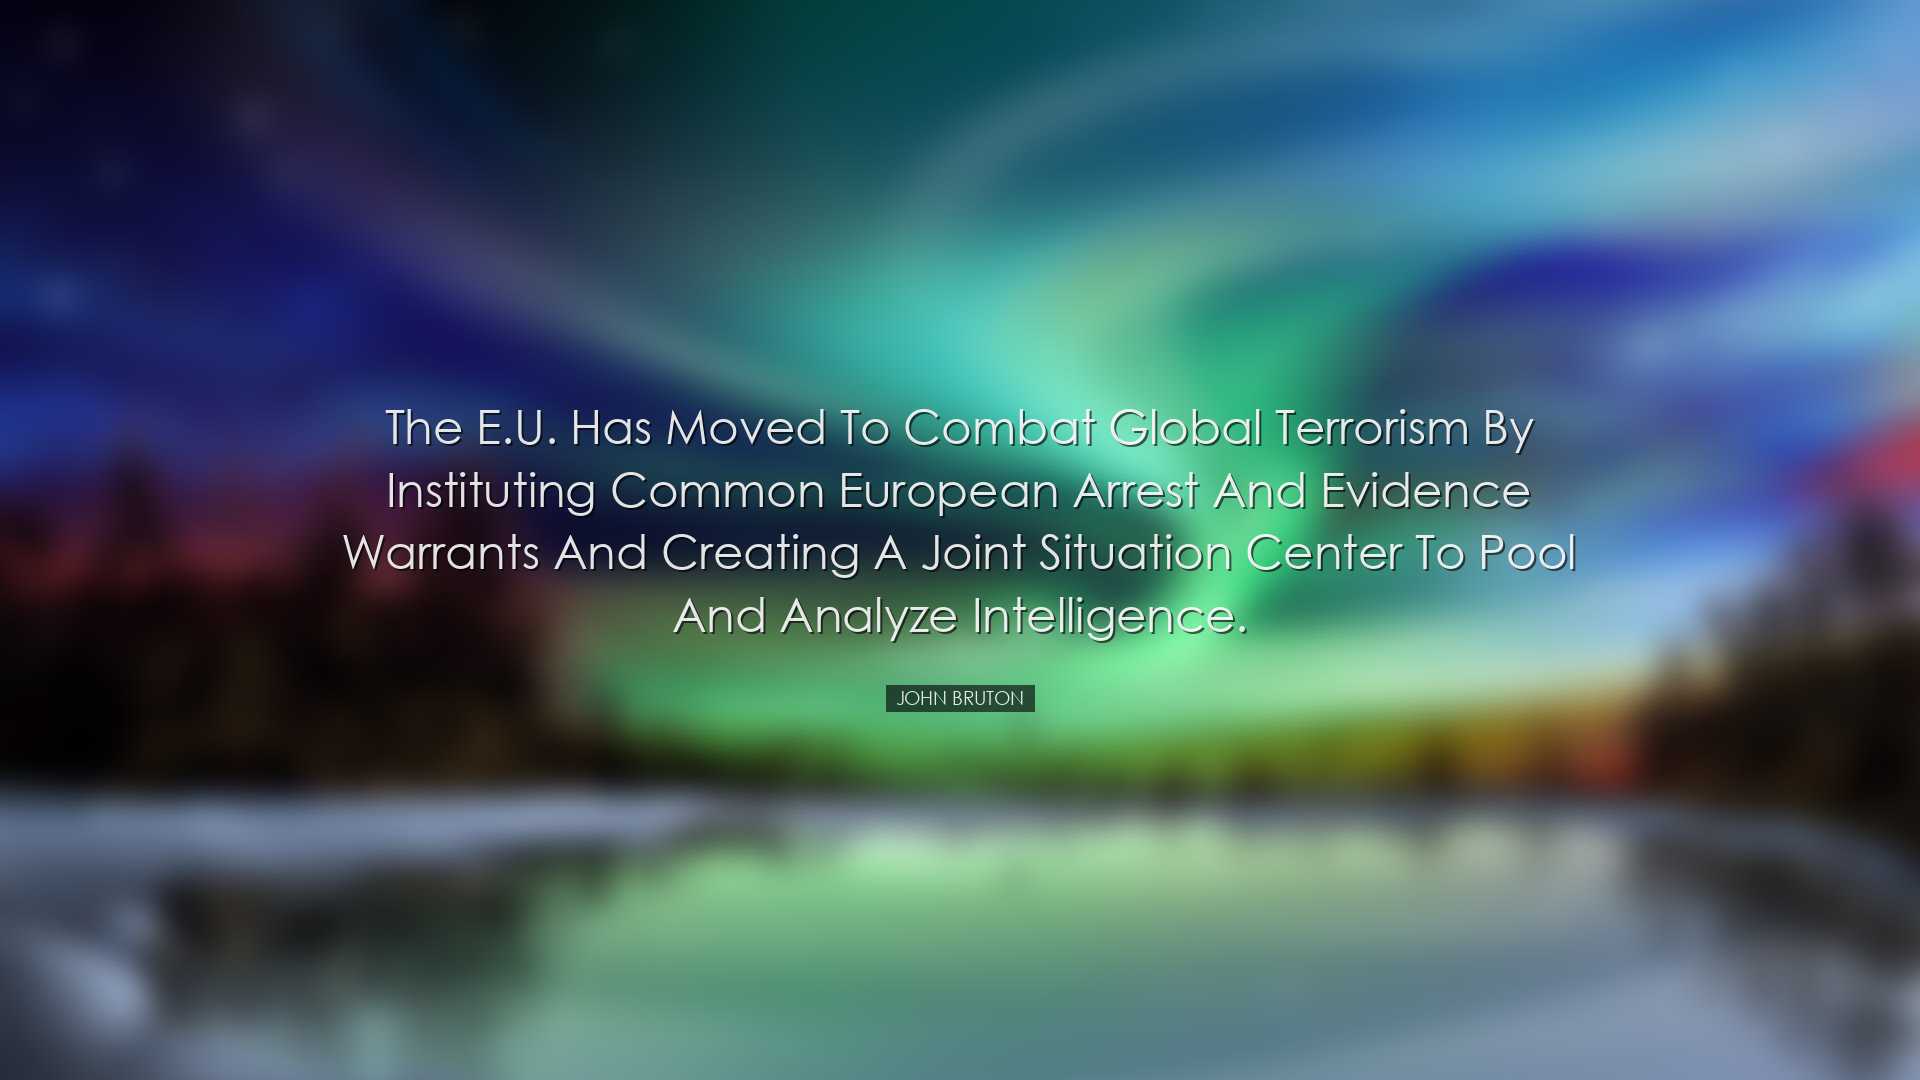 The E.U. has moved to combat global terrorism by instituting commo